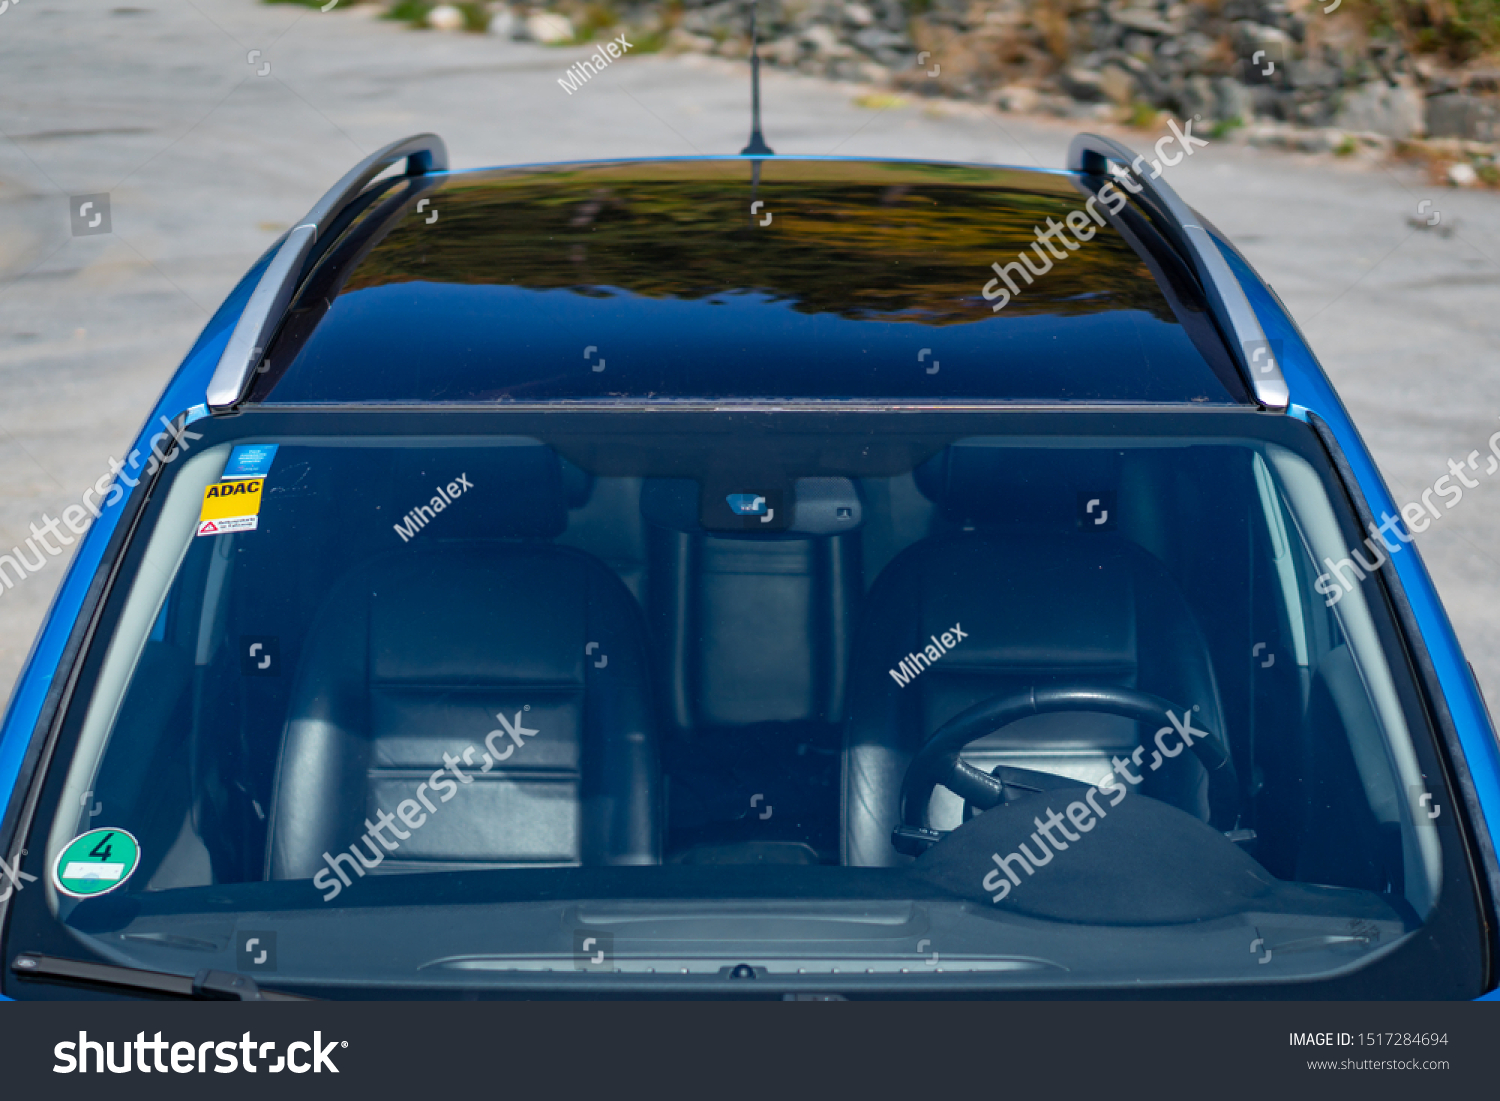 Clujnapocaclujromania0919panoramic Sunroof Glazed Dach Roof On Stock Photo Edit Now